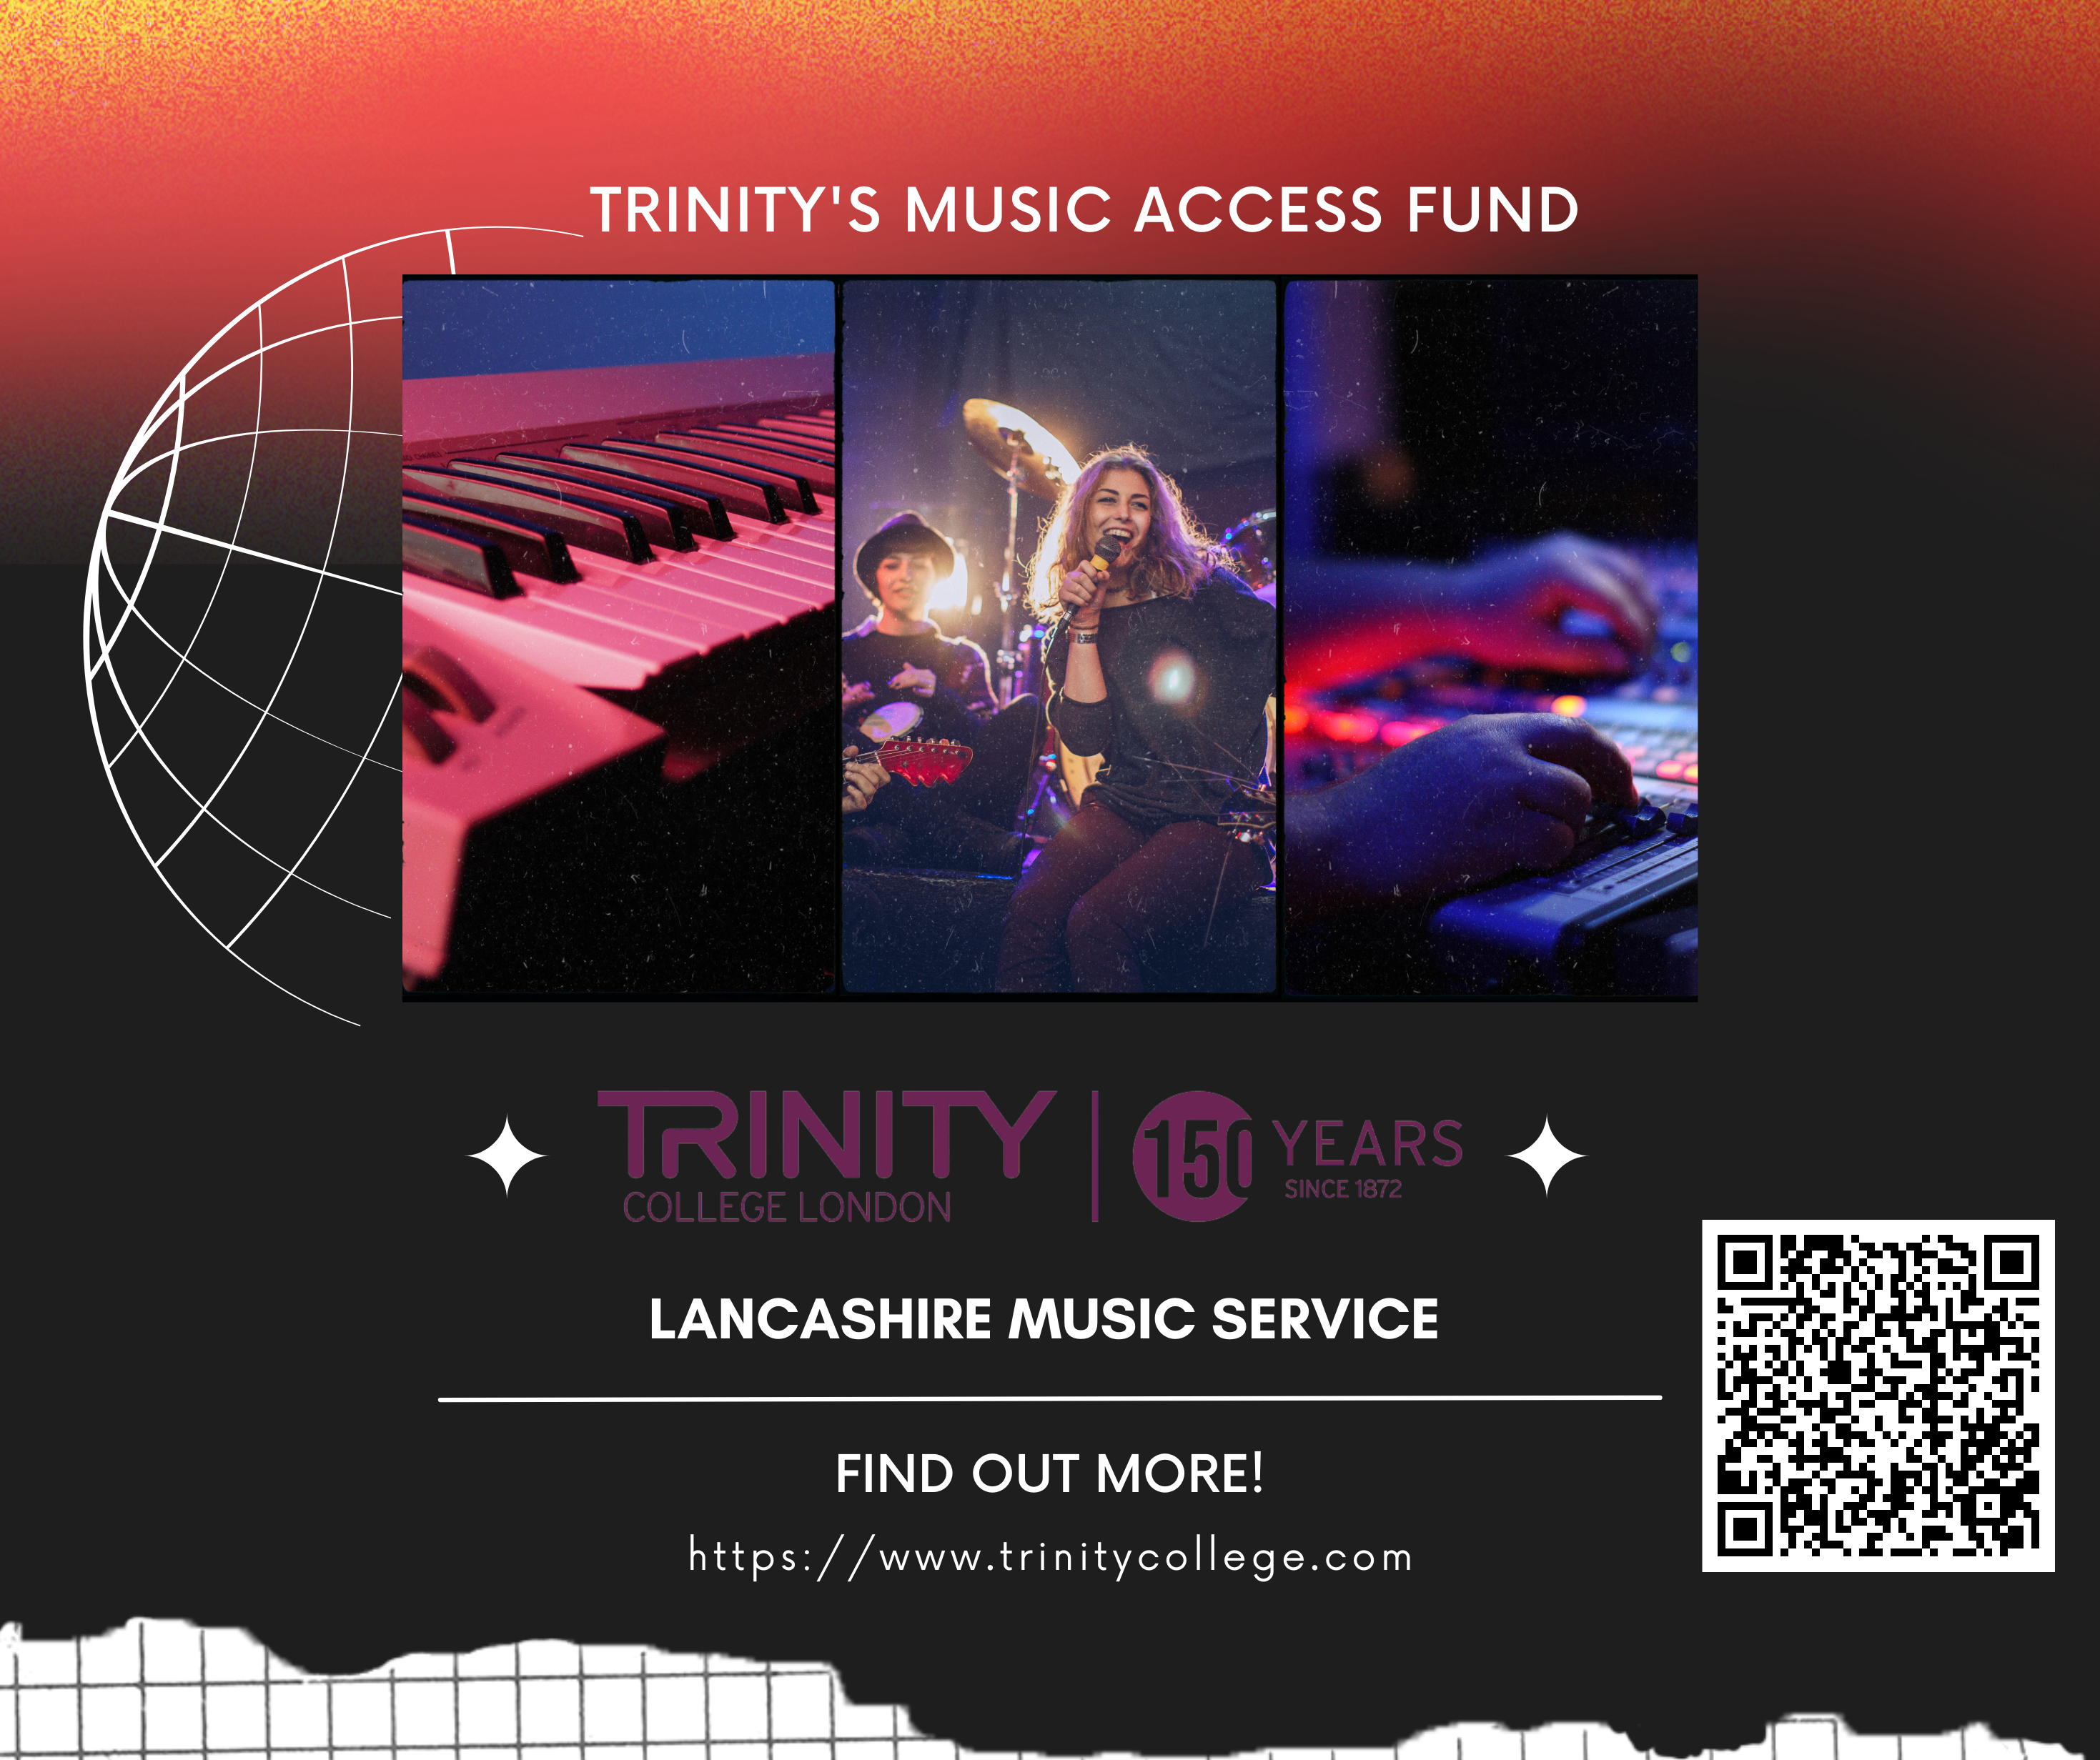 Poster for trinity music access fund